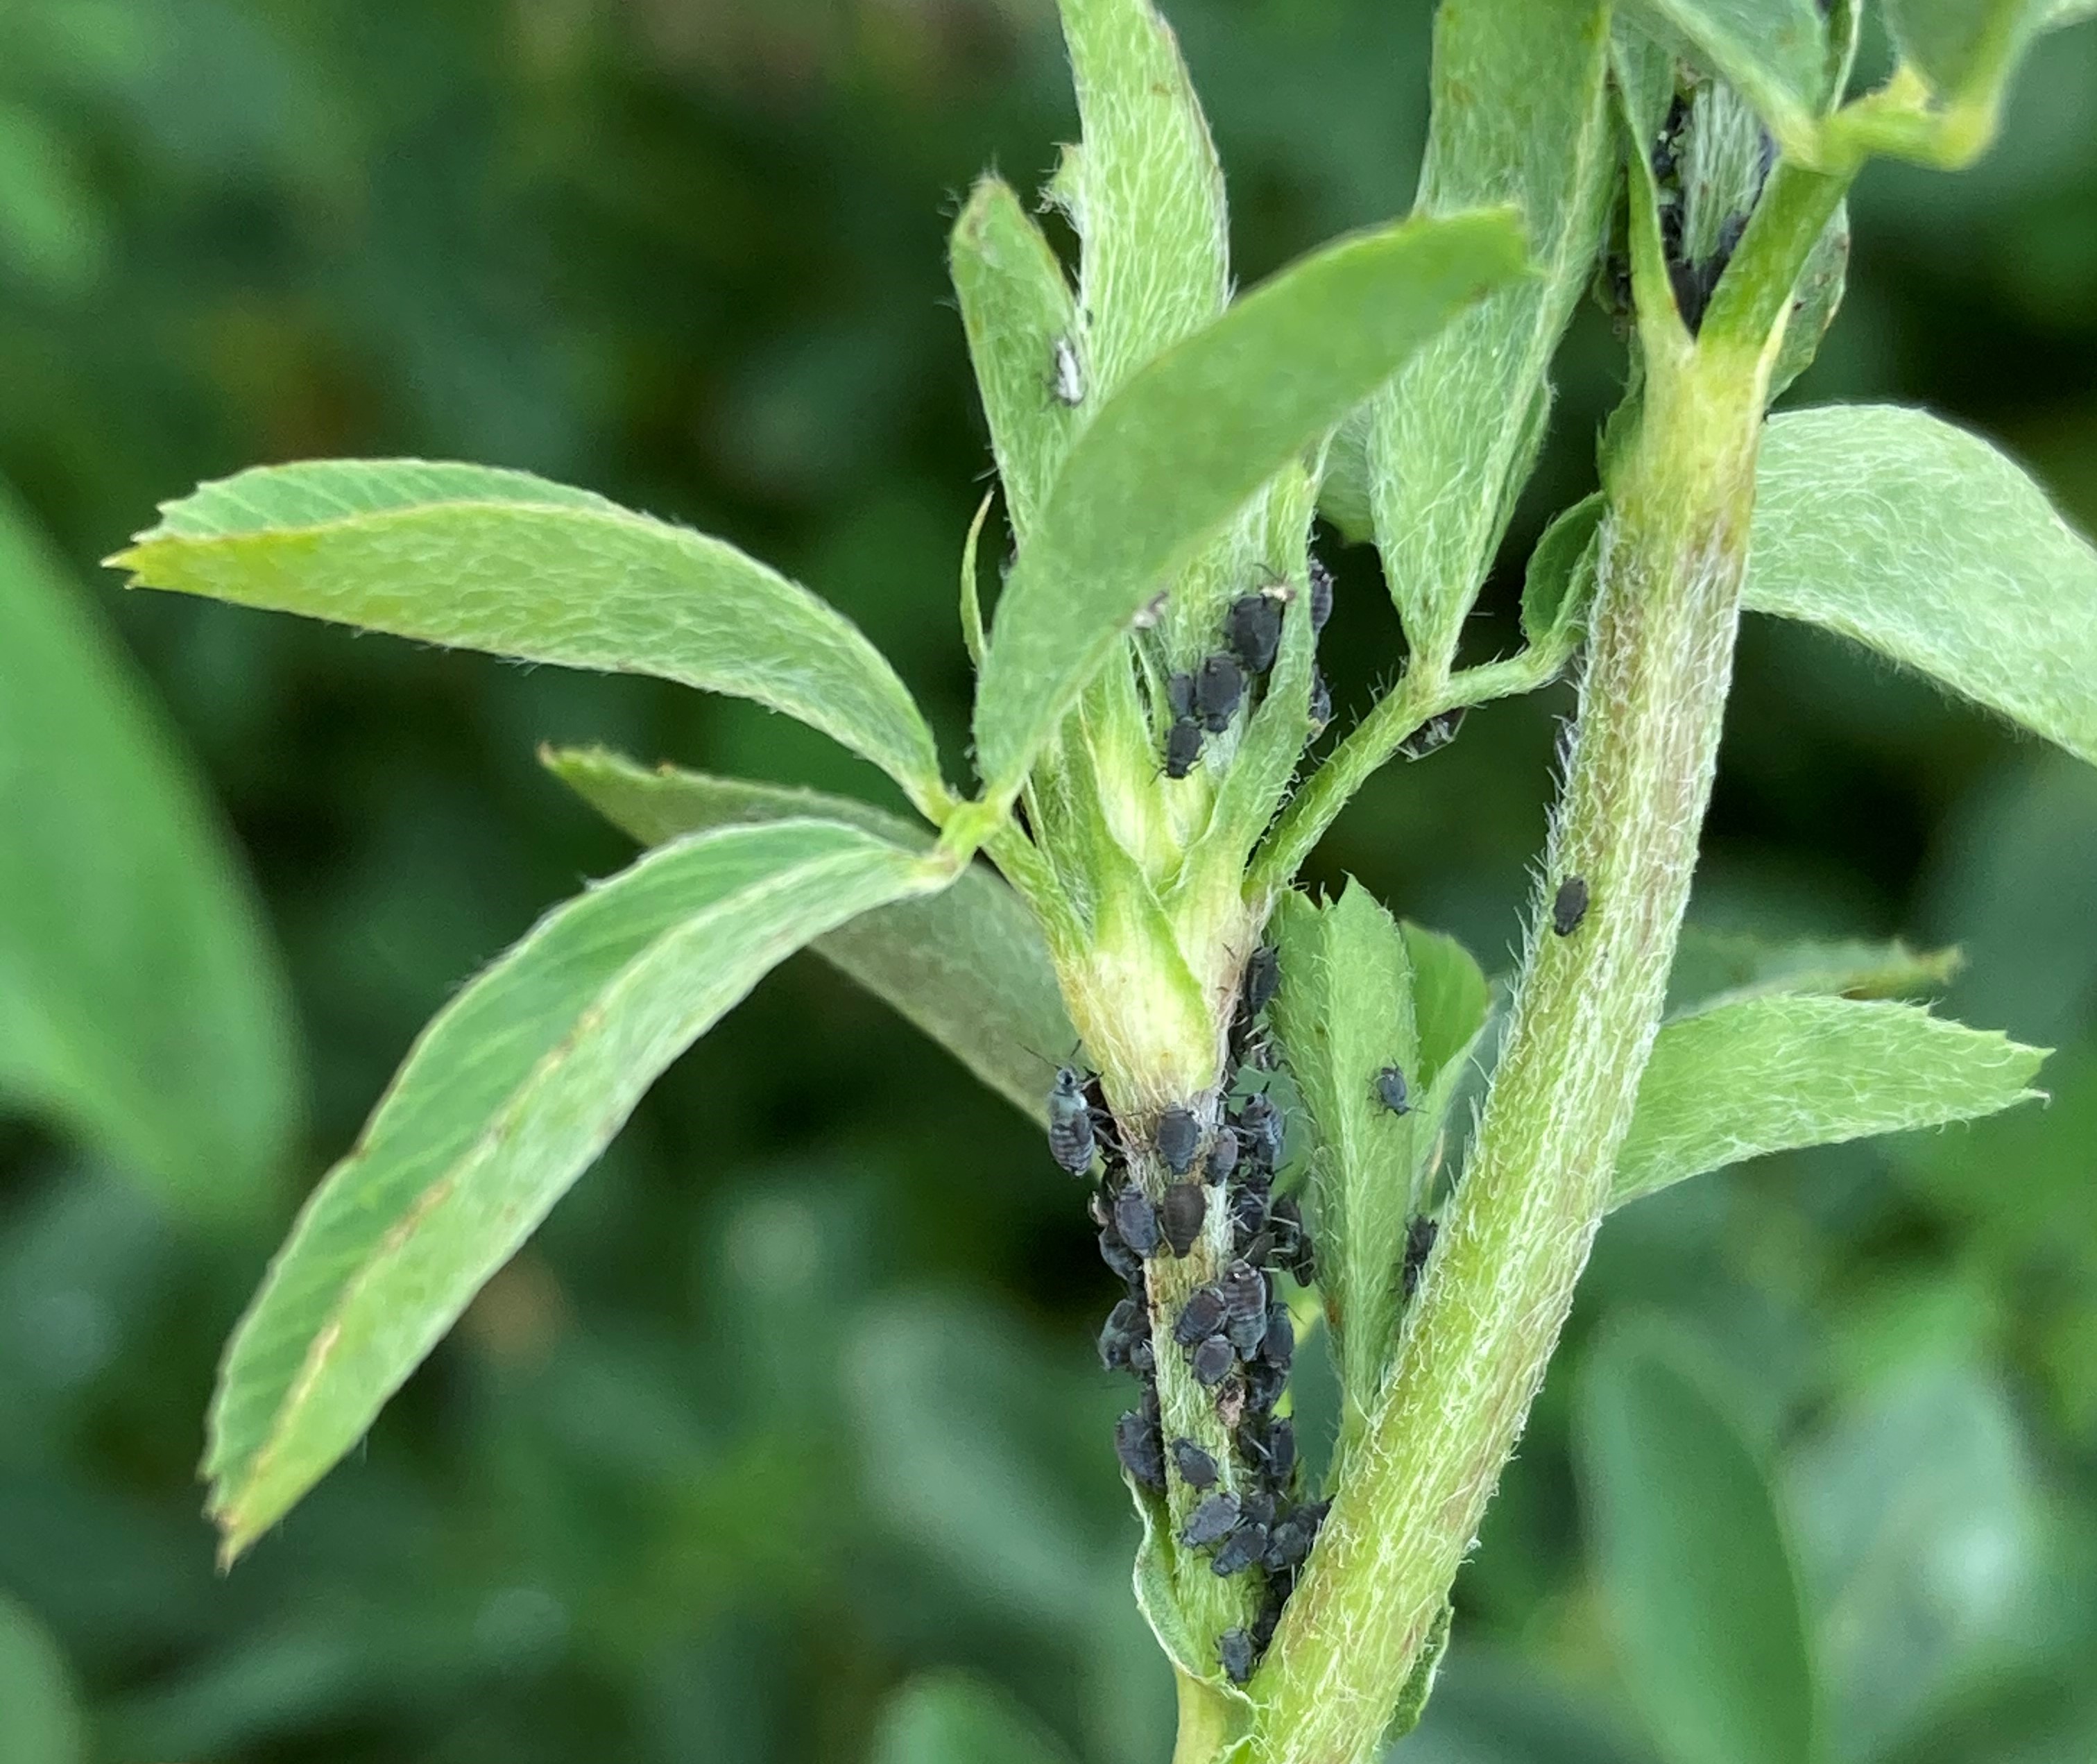 Cowpea aphids are likely to make a return to paddocks on the Monaro this spring Image Jo Powells